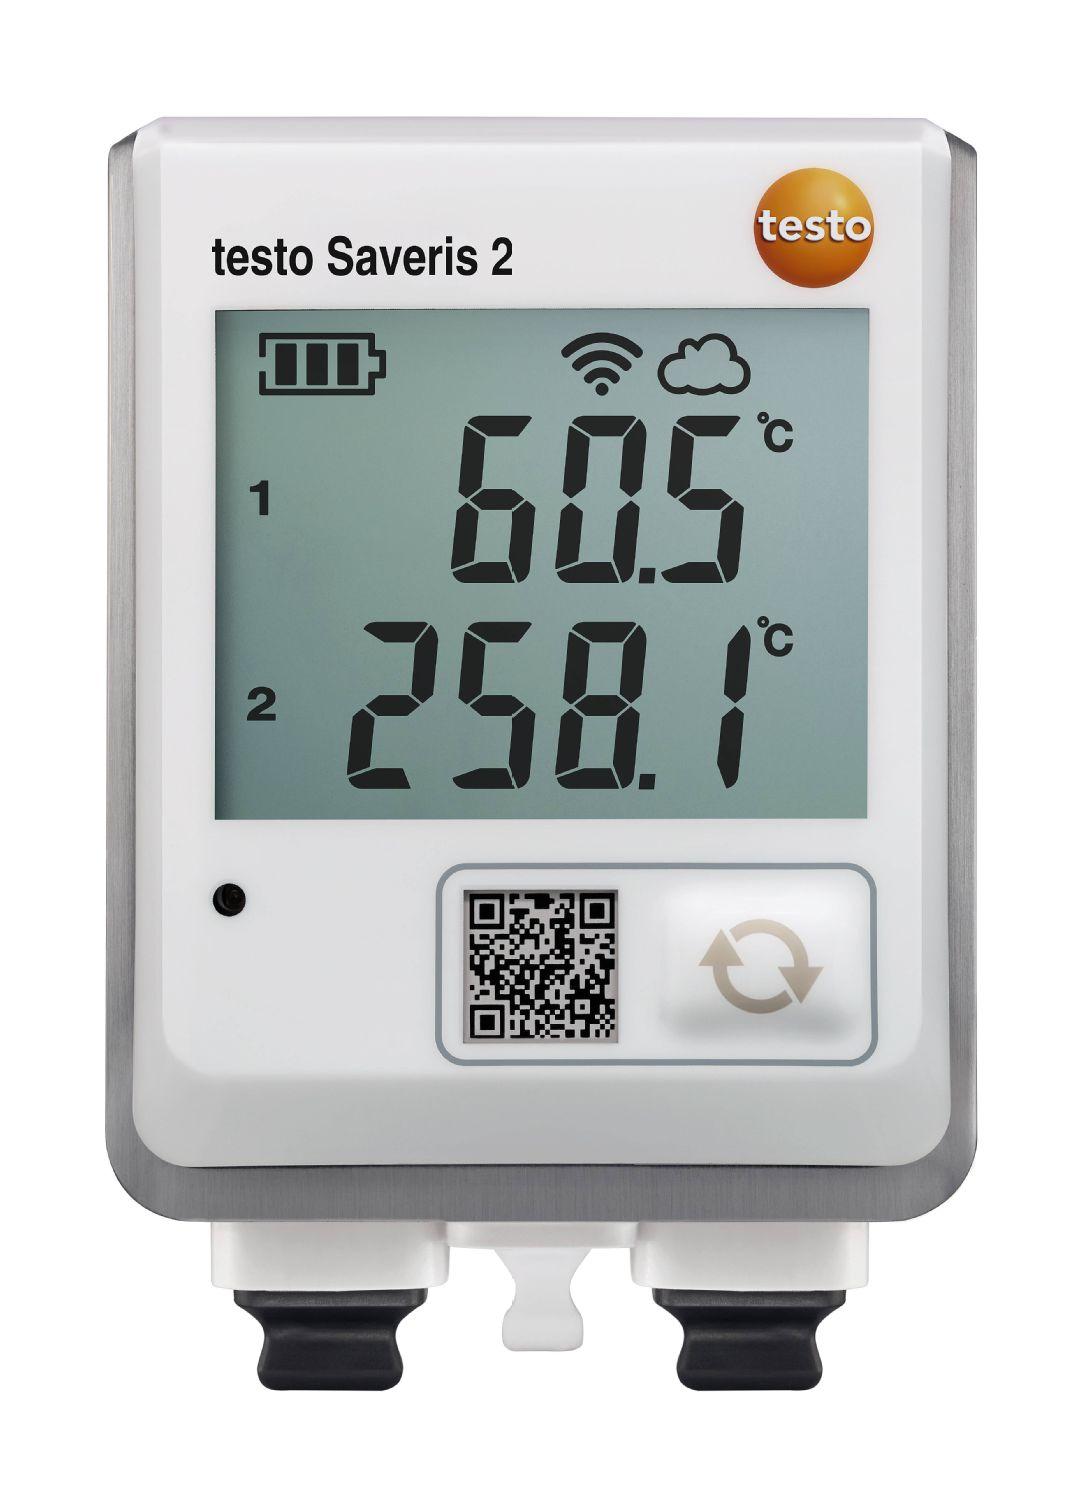 testo Saveris 2-T3 – WiFi data logger with display and 2 connections for TC temperature probes(testo Saveris 2-T3)